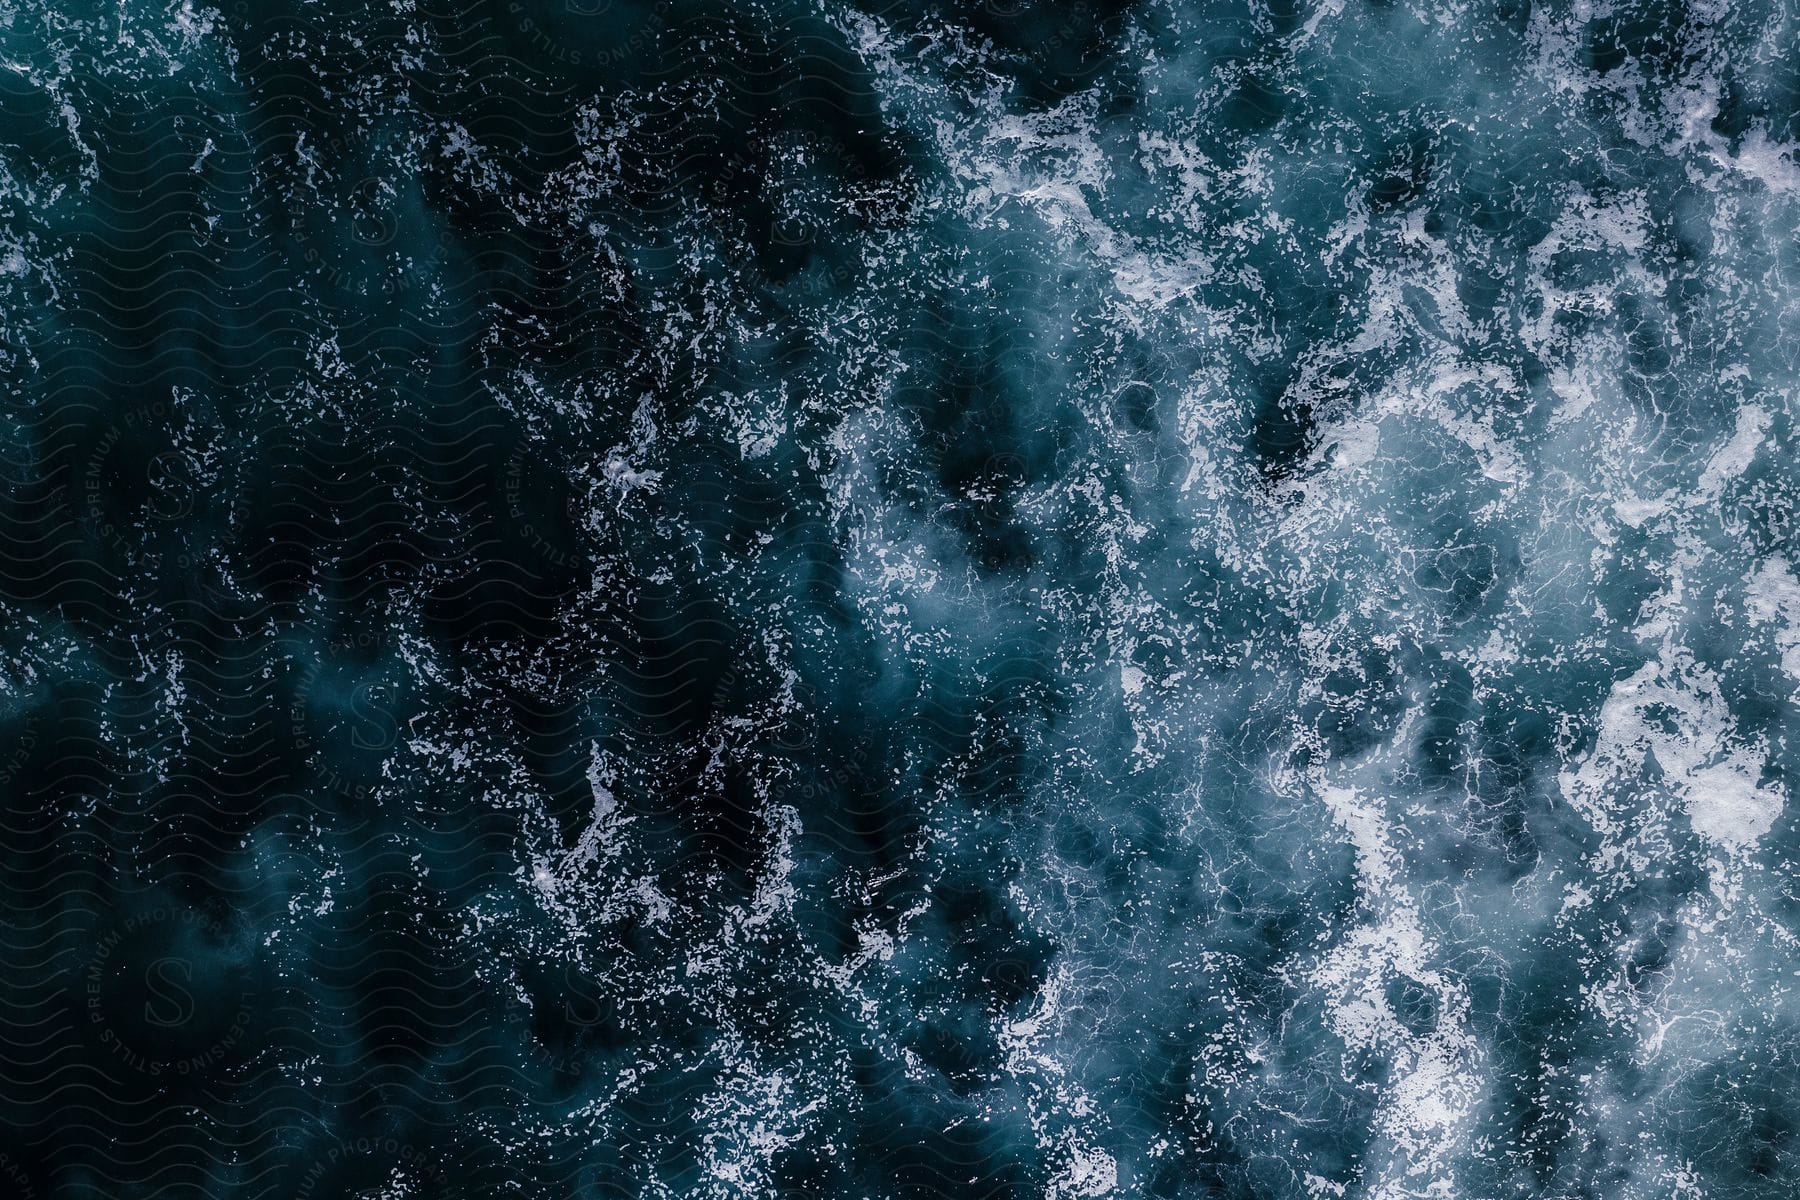 aerial view of ocean waves, with white foam on the surface of the blue water.